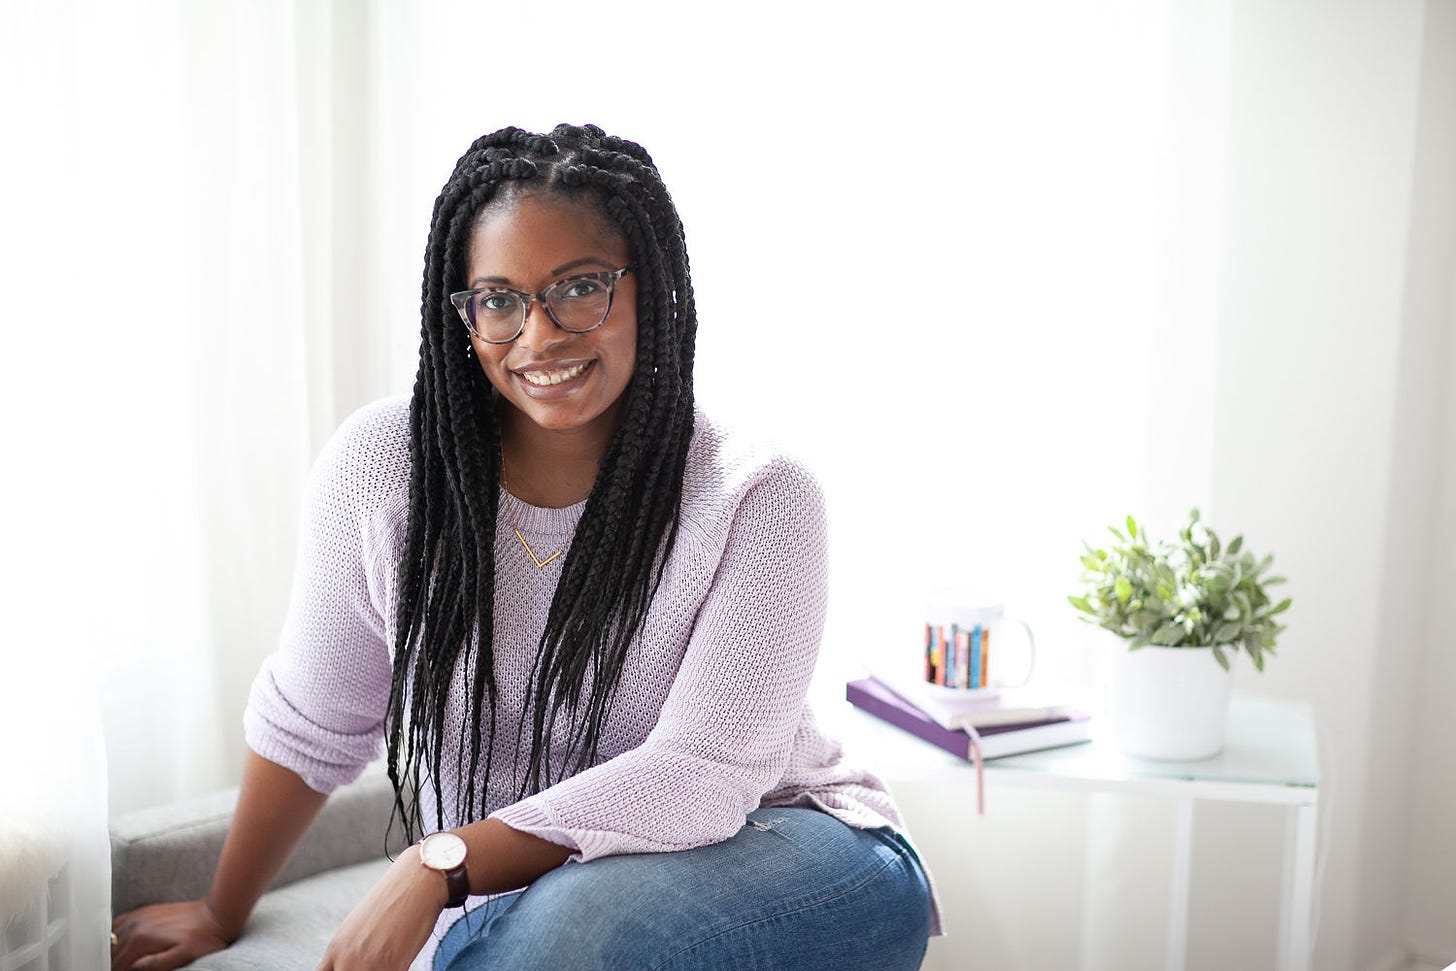 Black woman with box braids, glasses, and a purple sweater sitting facing the camera with a mug and books in the background